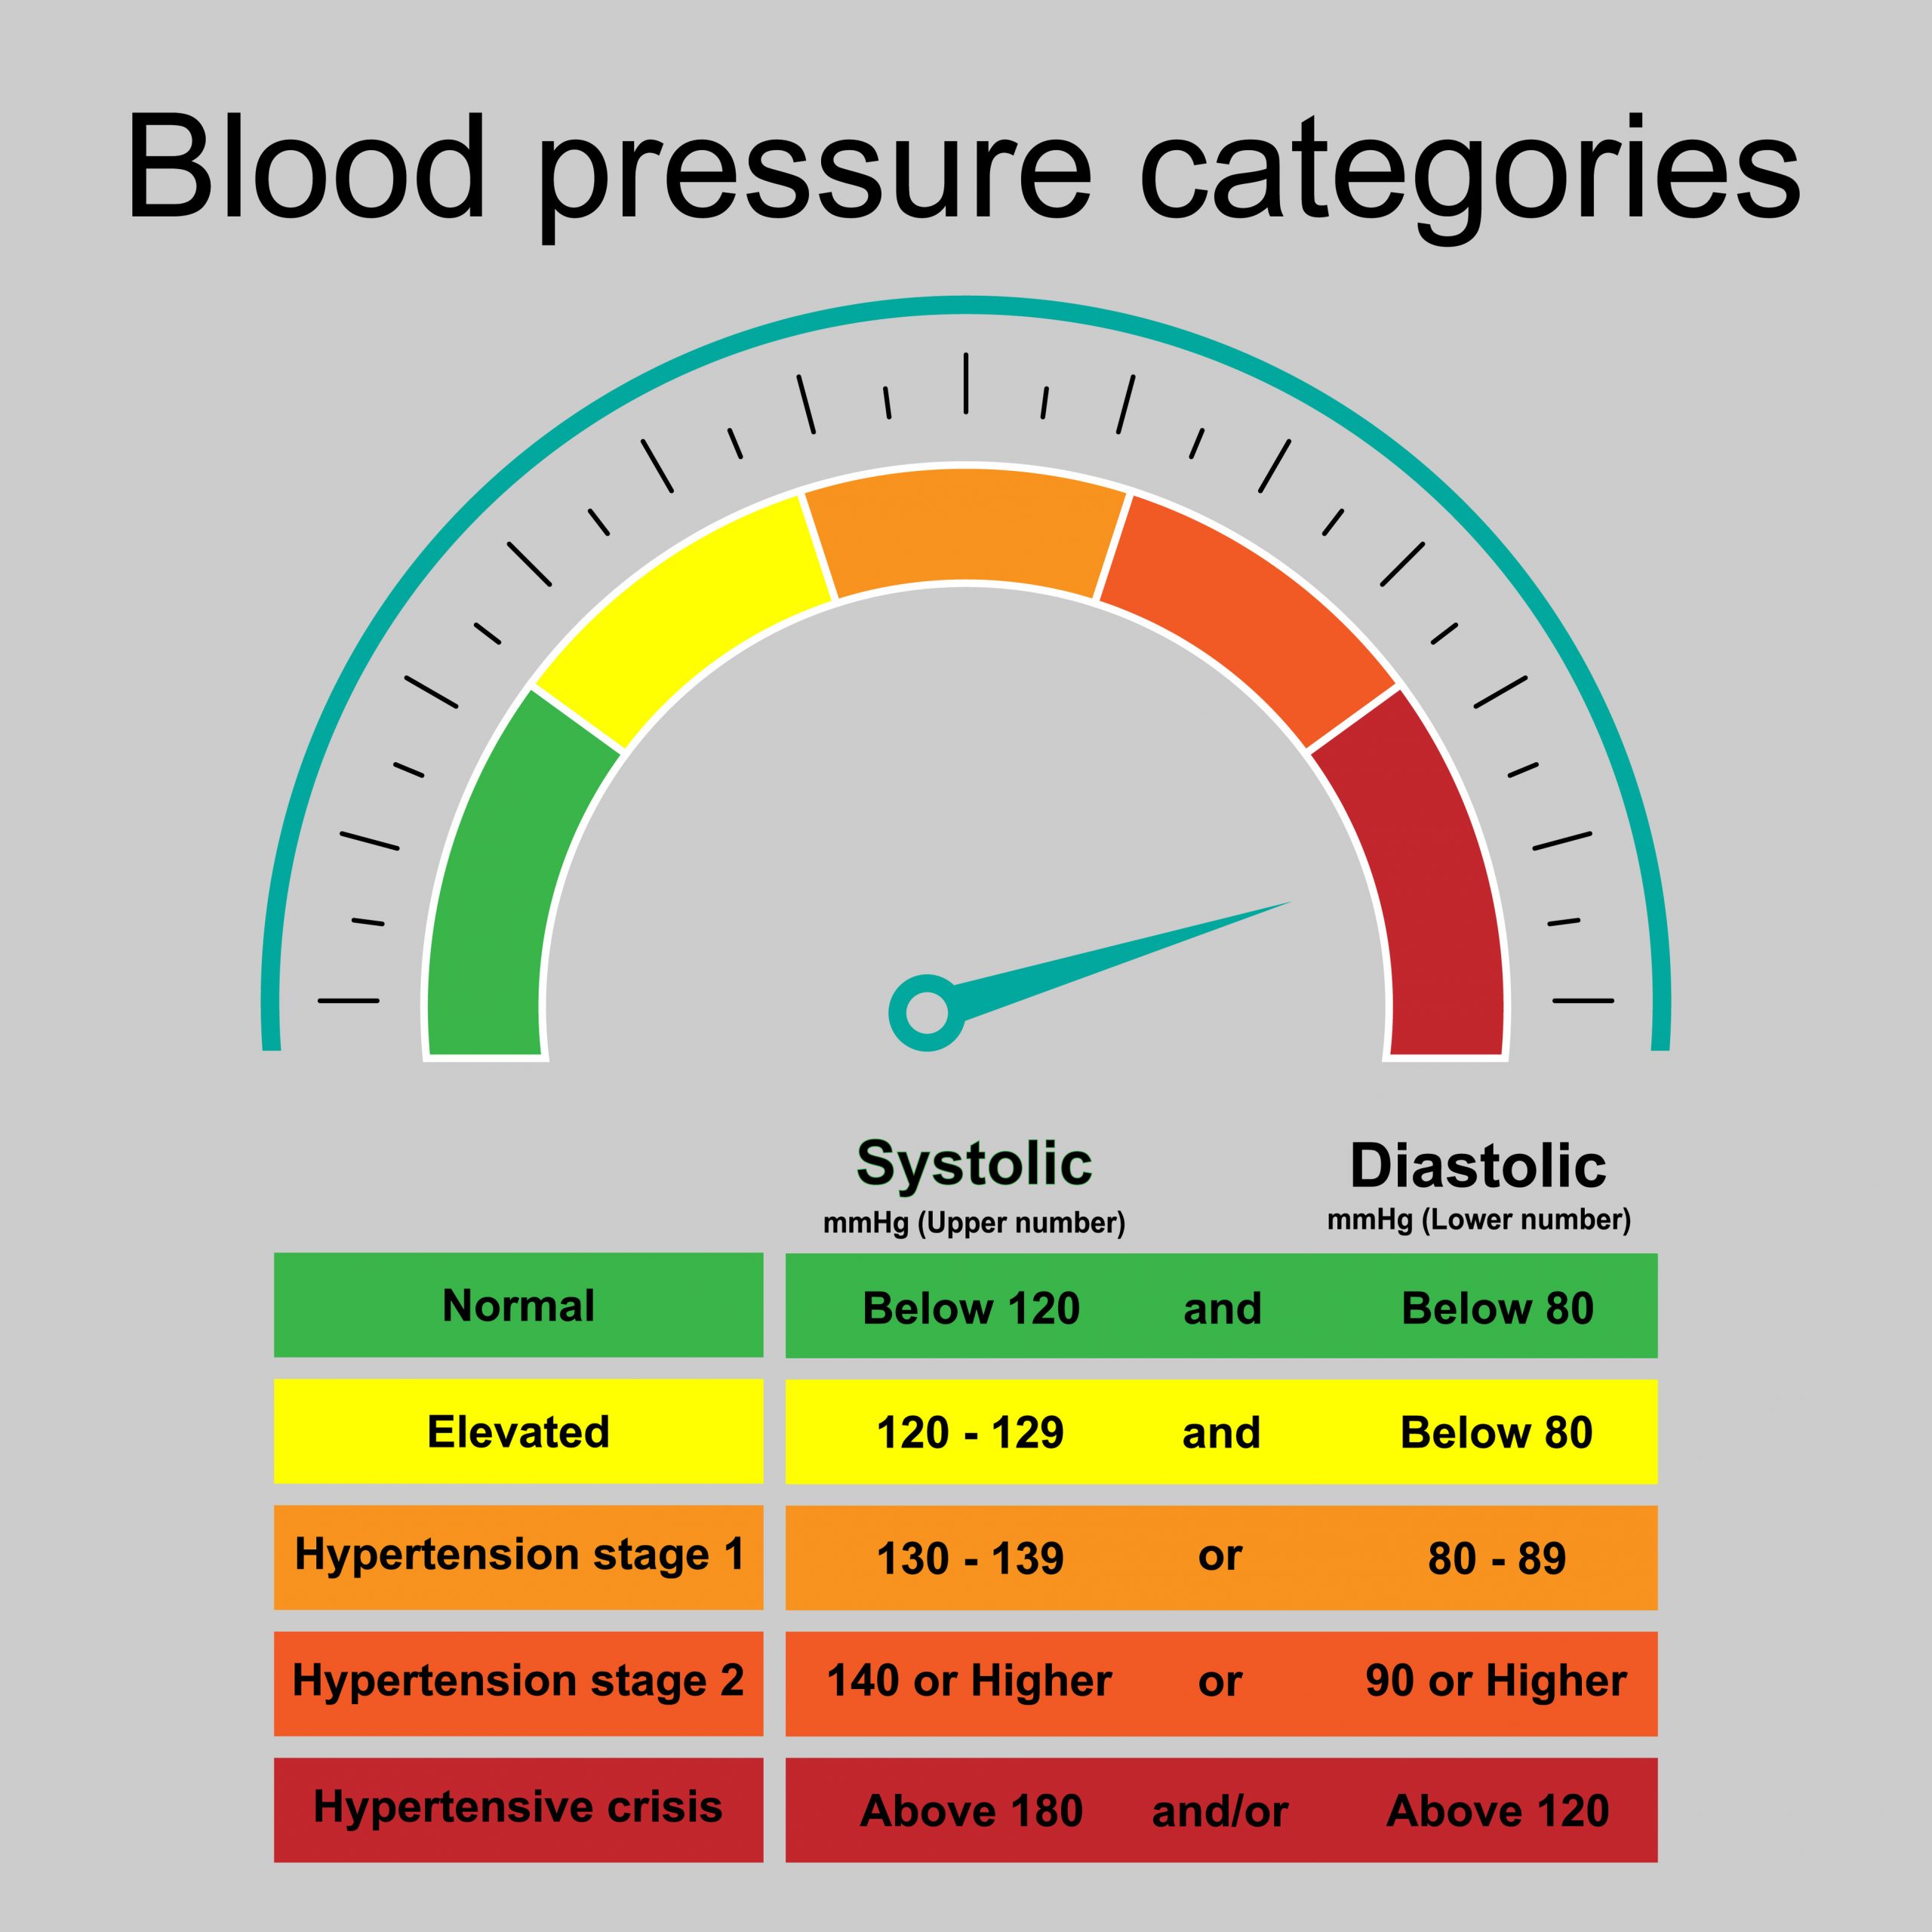 Image showing blood pressure ranges for normal (120/80), elevated (120-129/80). hypertension stage 1 (130-139/80-89), hypertension stage 2 (140/90), and hypertensive crisis (above 180/above 120).